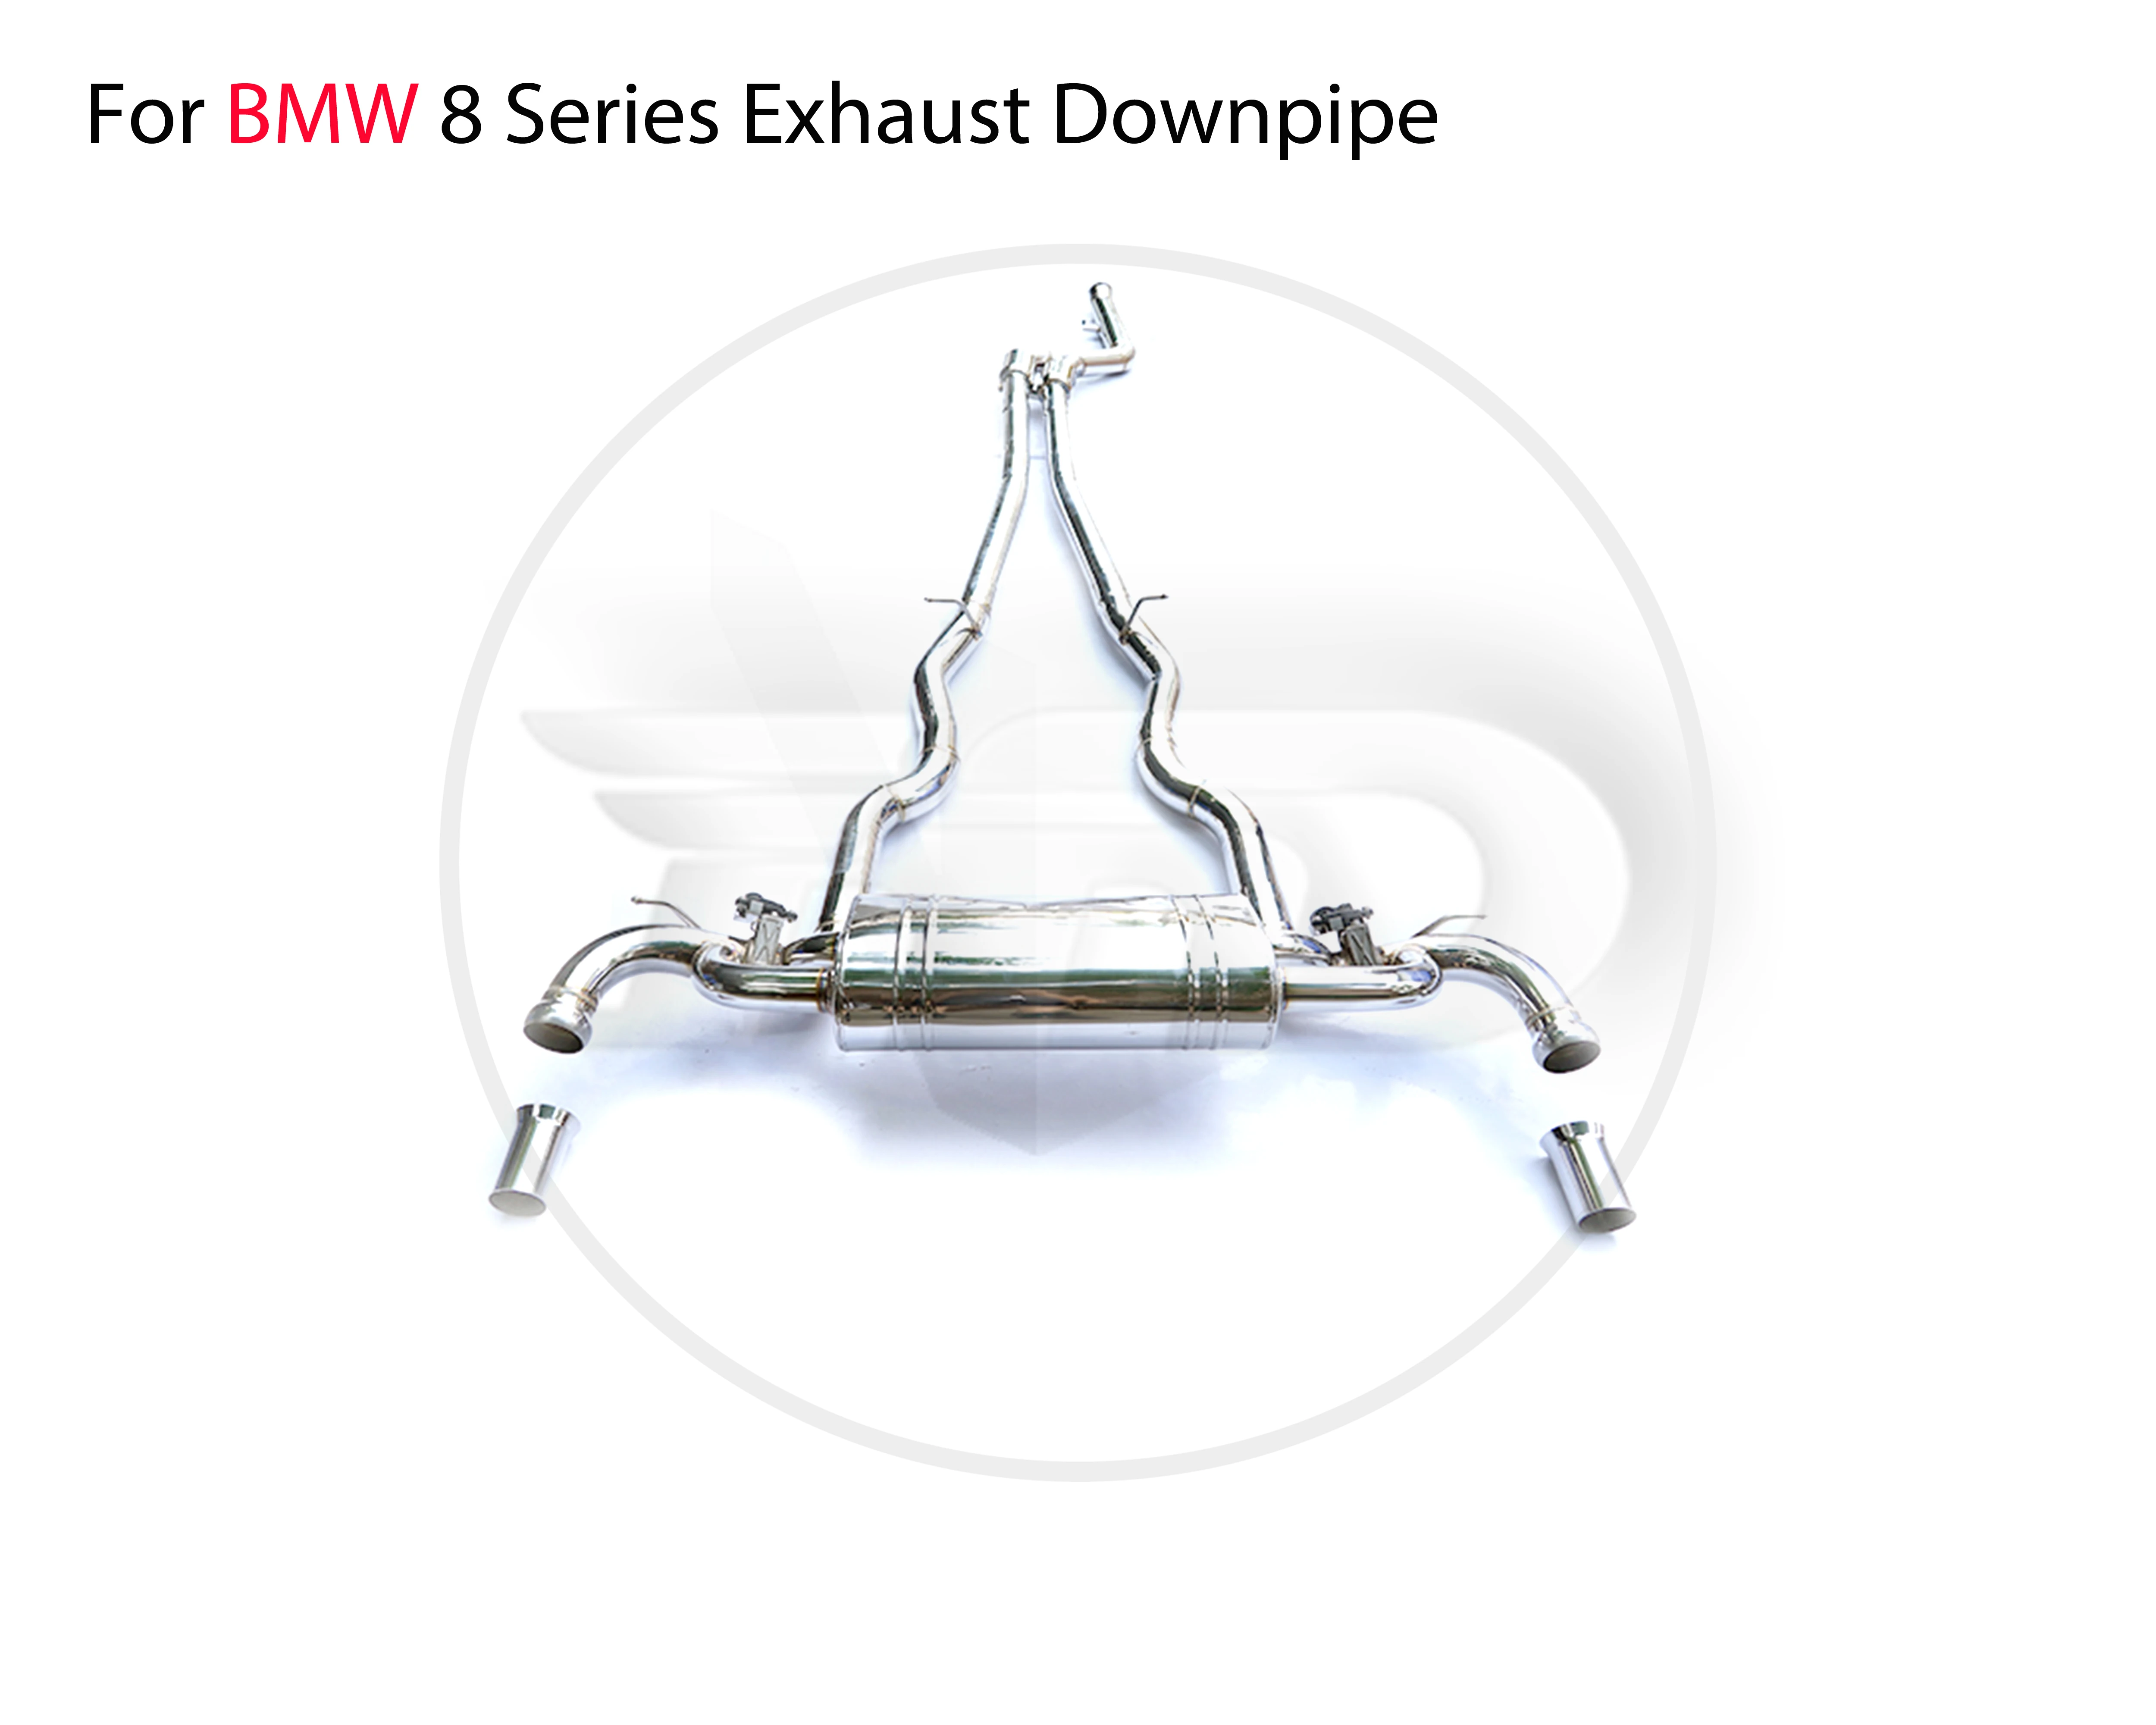 

HMD Stainless Steel Material Exhaust System Performance Catback for BMW 840i Auto Modification Electronic Valve Muffler